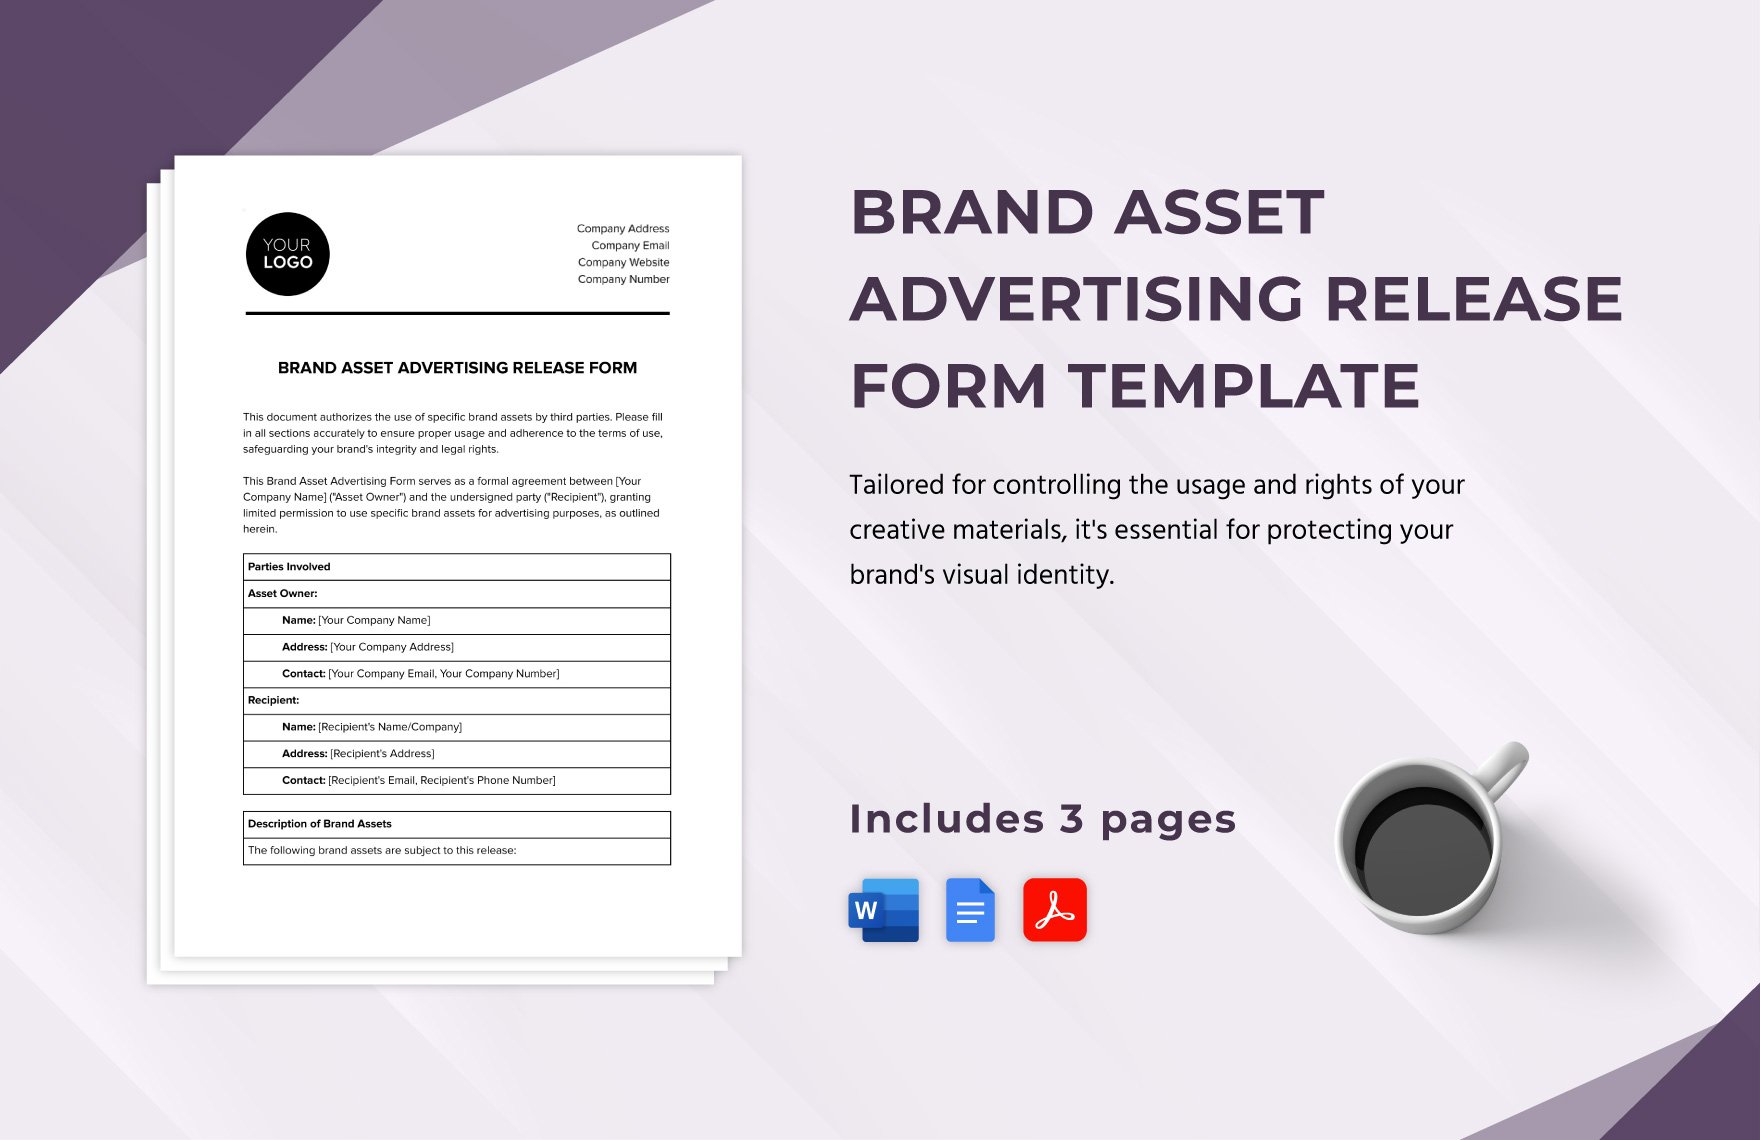 Brand Asset Advertising Release Form Template